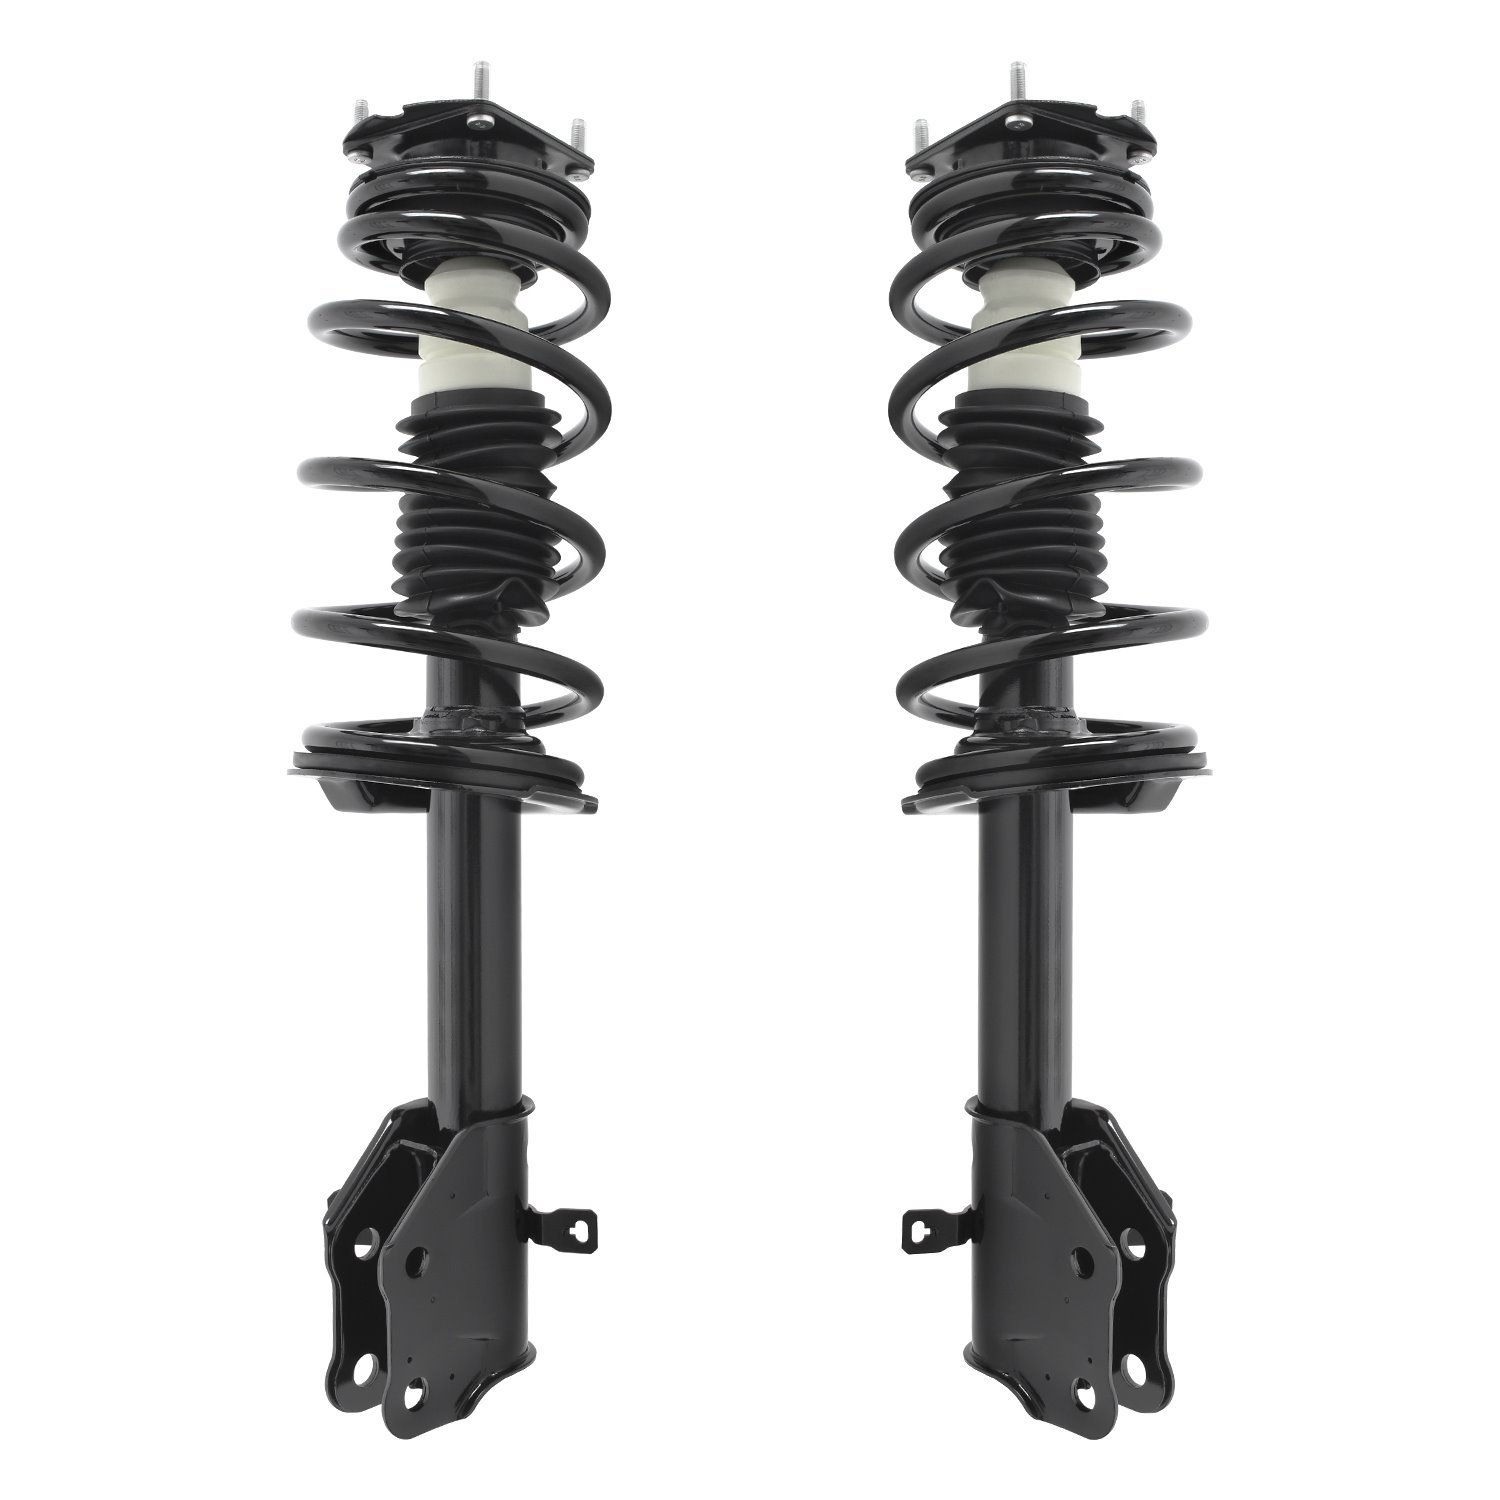 2-11983-11984-001 Suspension Strut & Coil Spring Assembly Set Fits Select Ford Edge, Lincoln MKX